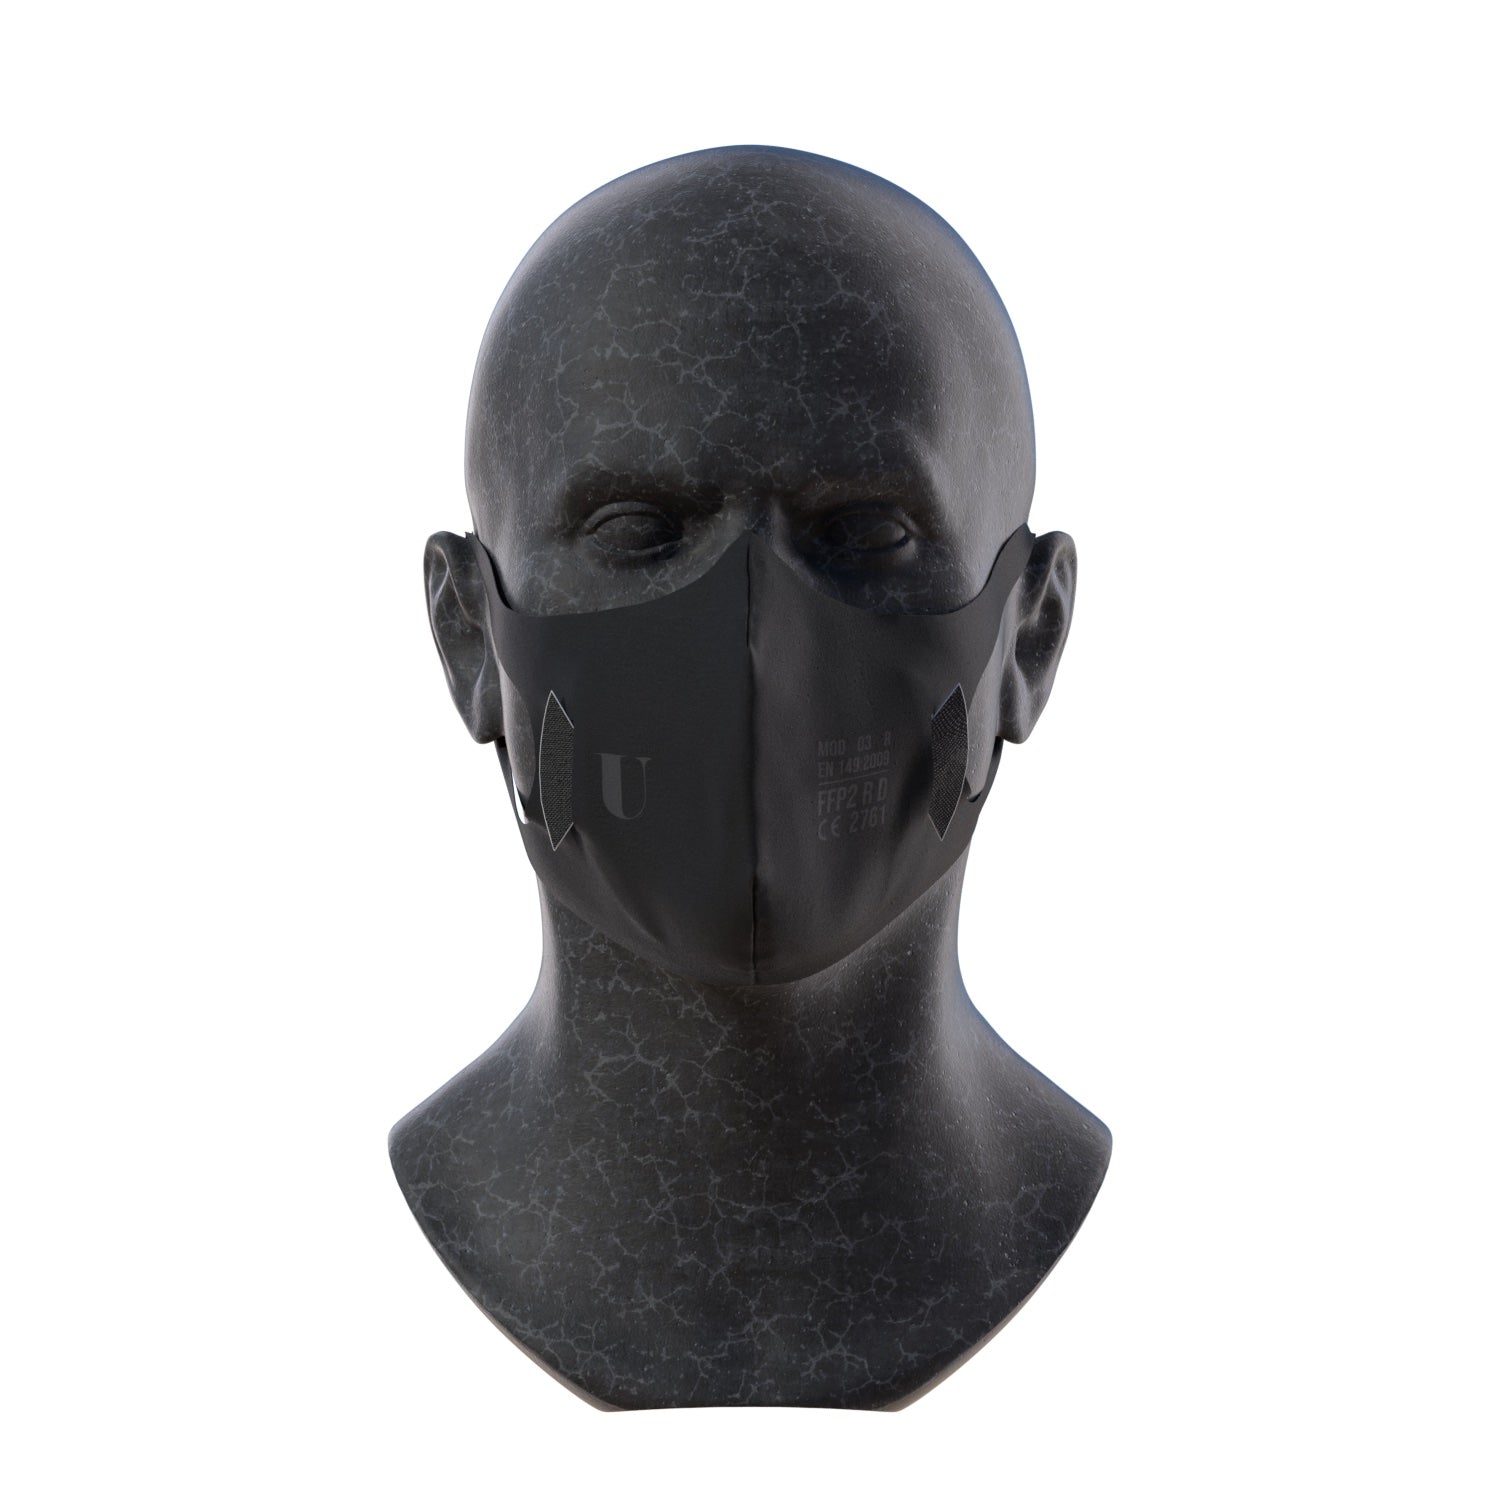 🔴 SUPREME BLACK NEOPRENE FACE MASK 🔴 - clothing & accessories